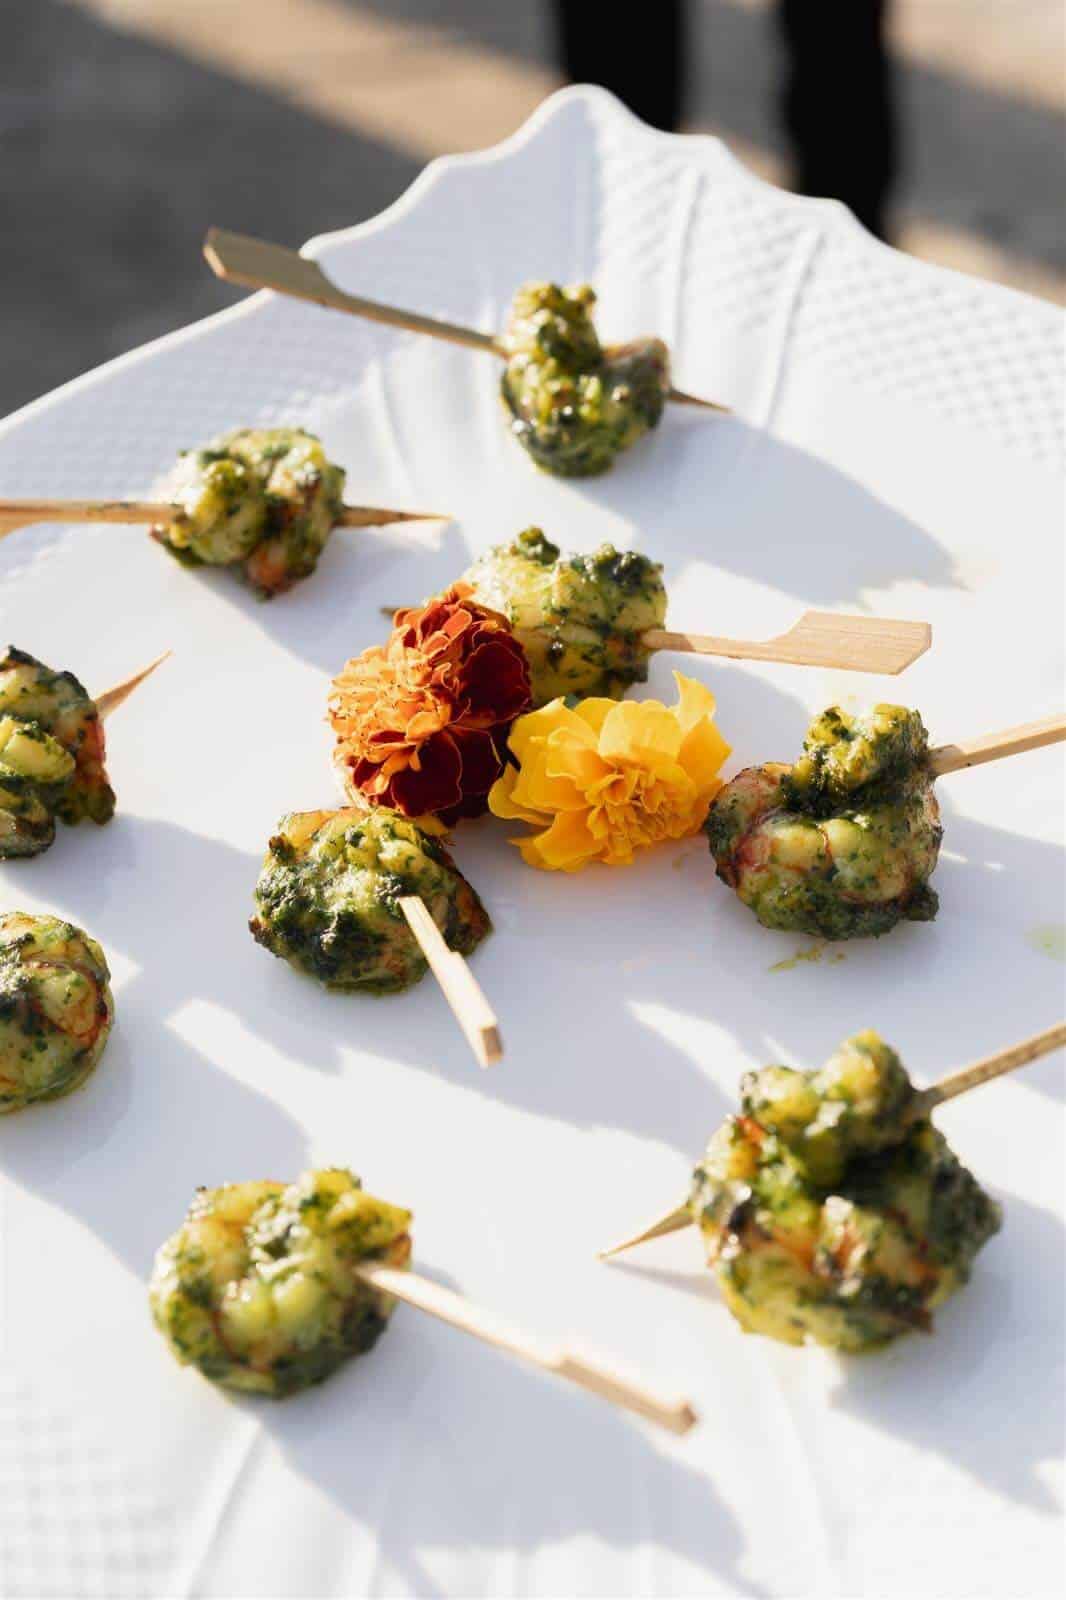 stick appetizers with shrimps and veggies